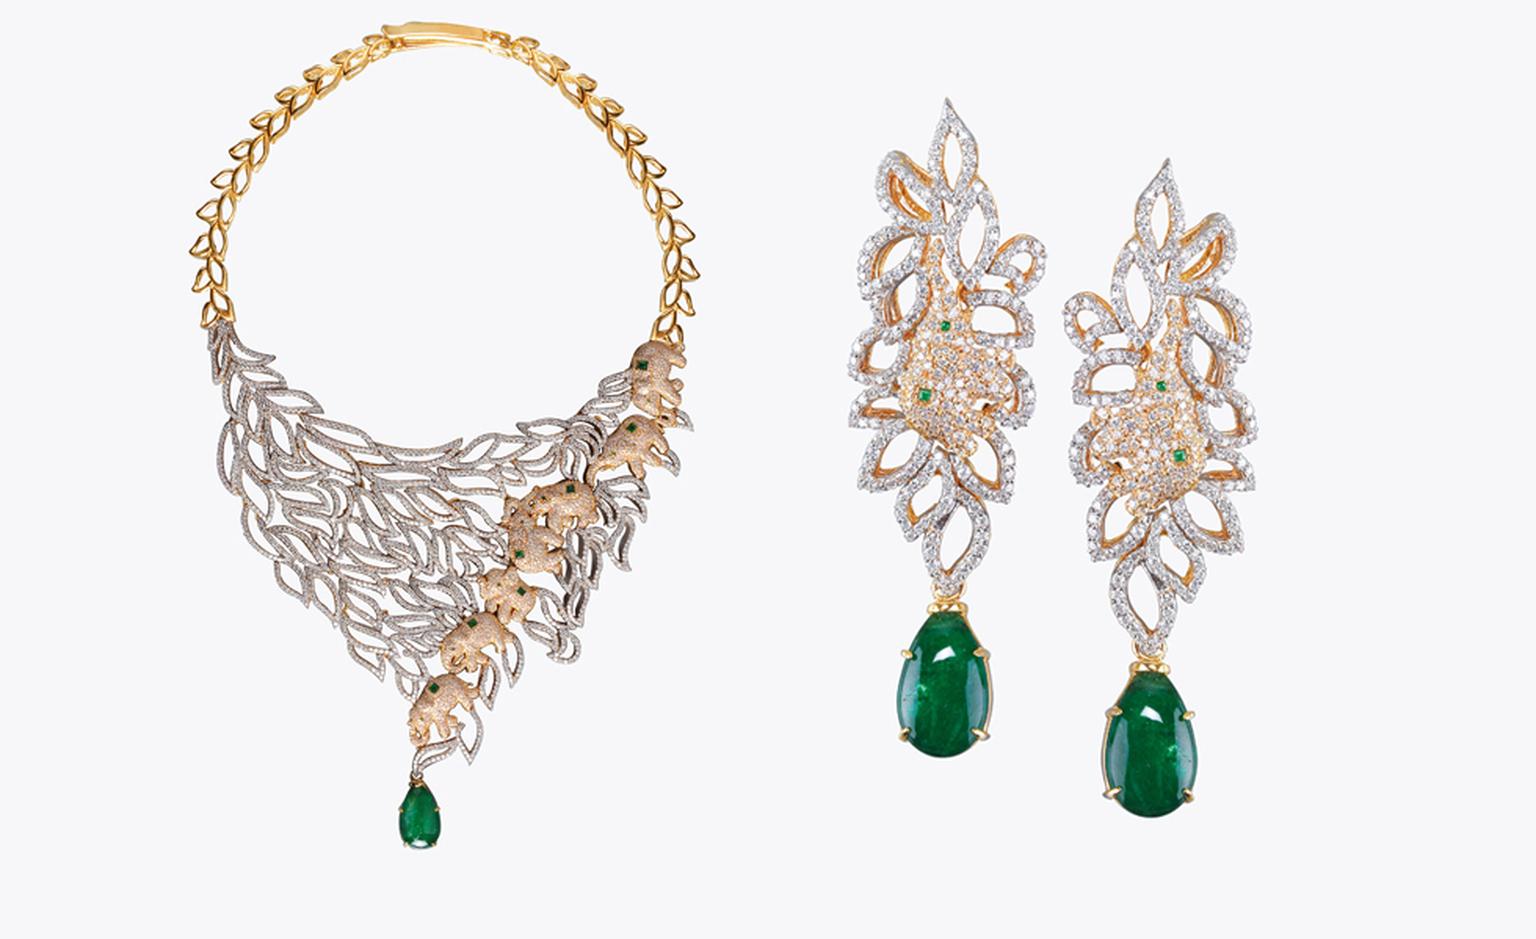 Meena, Hyderabad. Necklace and earrings, Zambian emeralds and diamonds in yellow gold. $60,000.